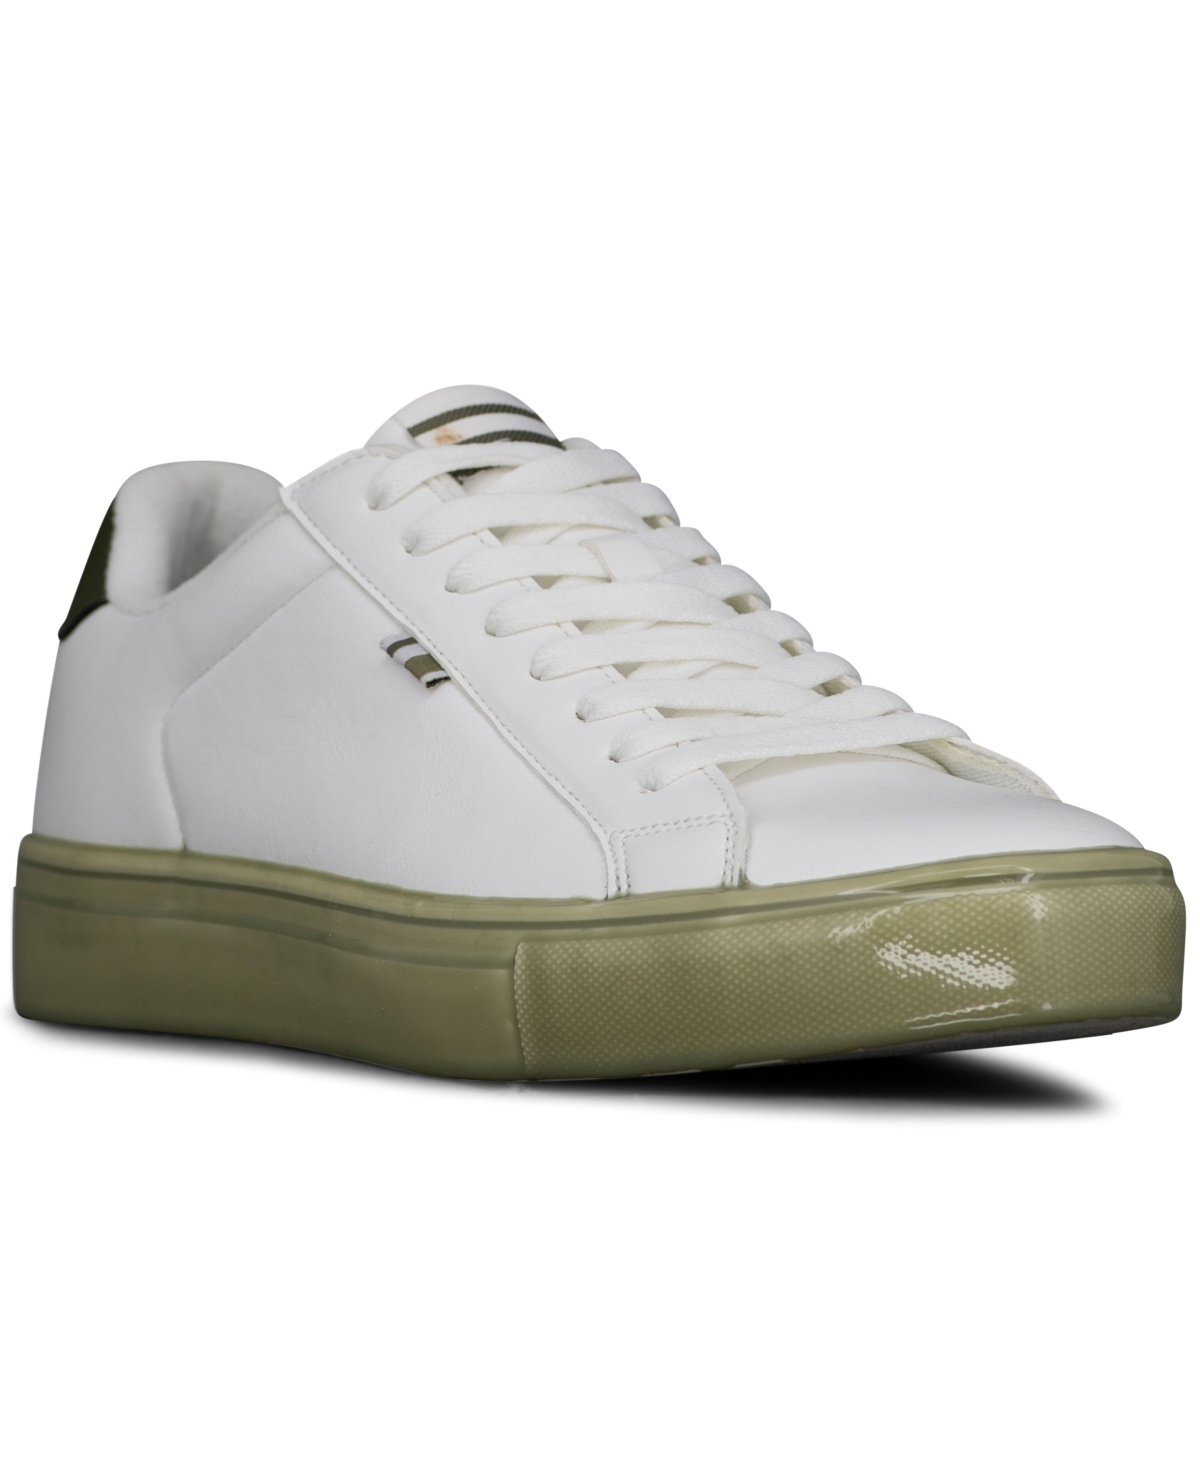 Men's Crowley Low Casual Sneakers from Finish Line - White/Elm